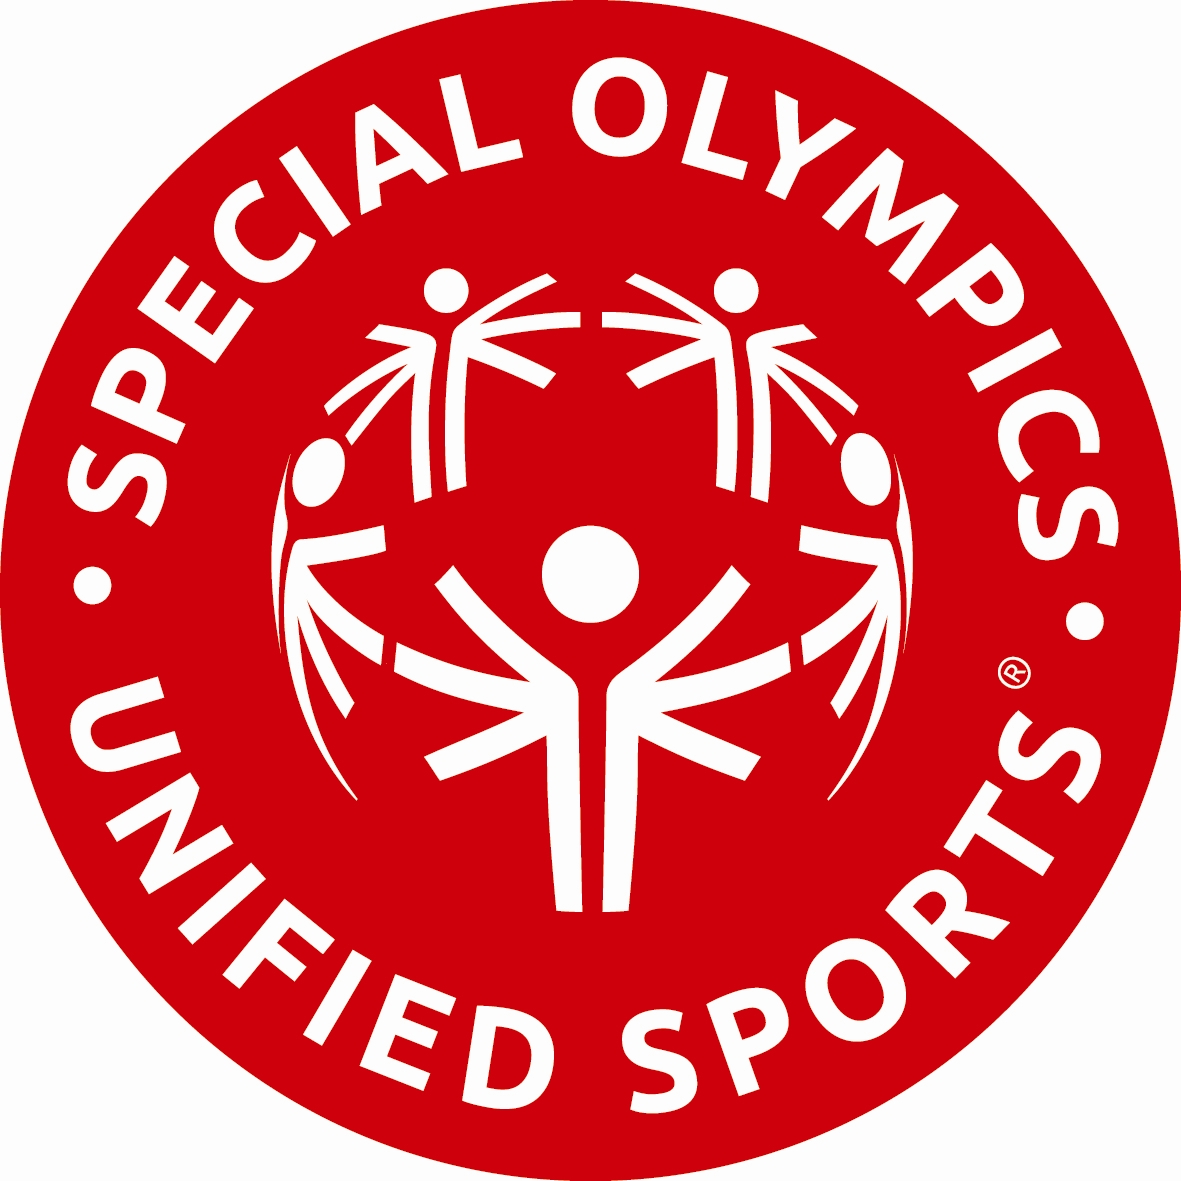 Unified Physical Education - Unified Champion Schools Portal